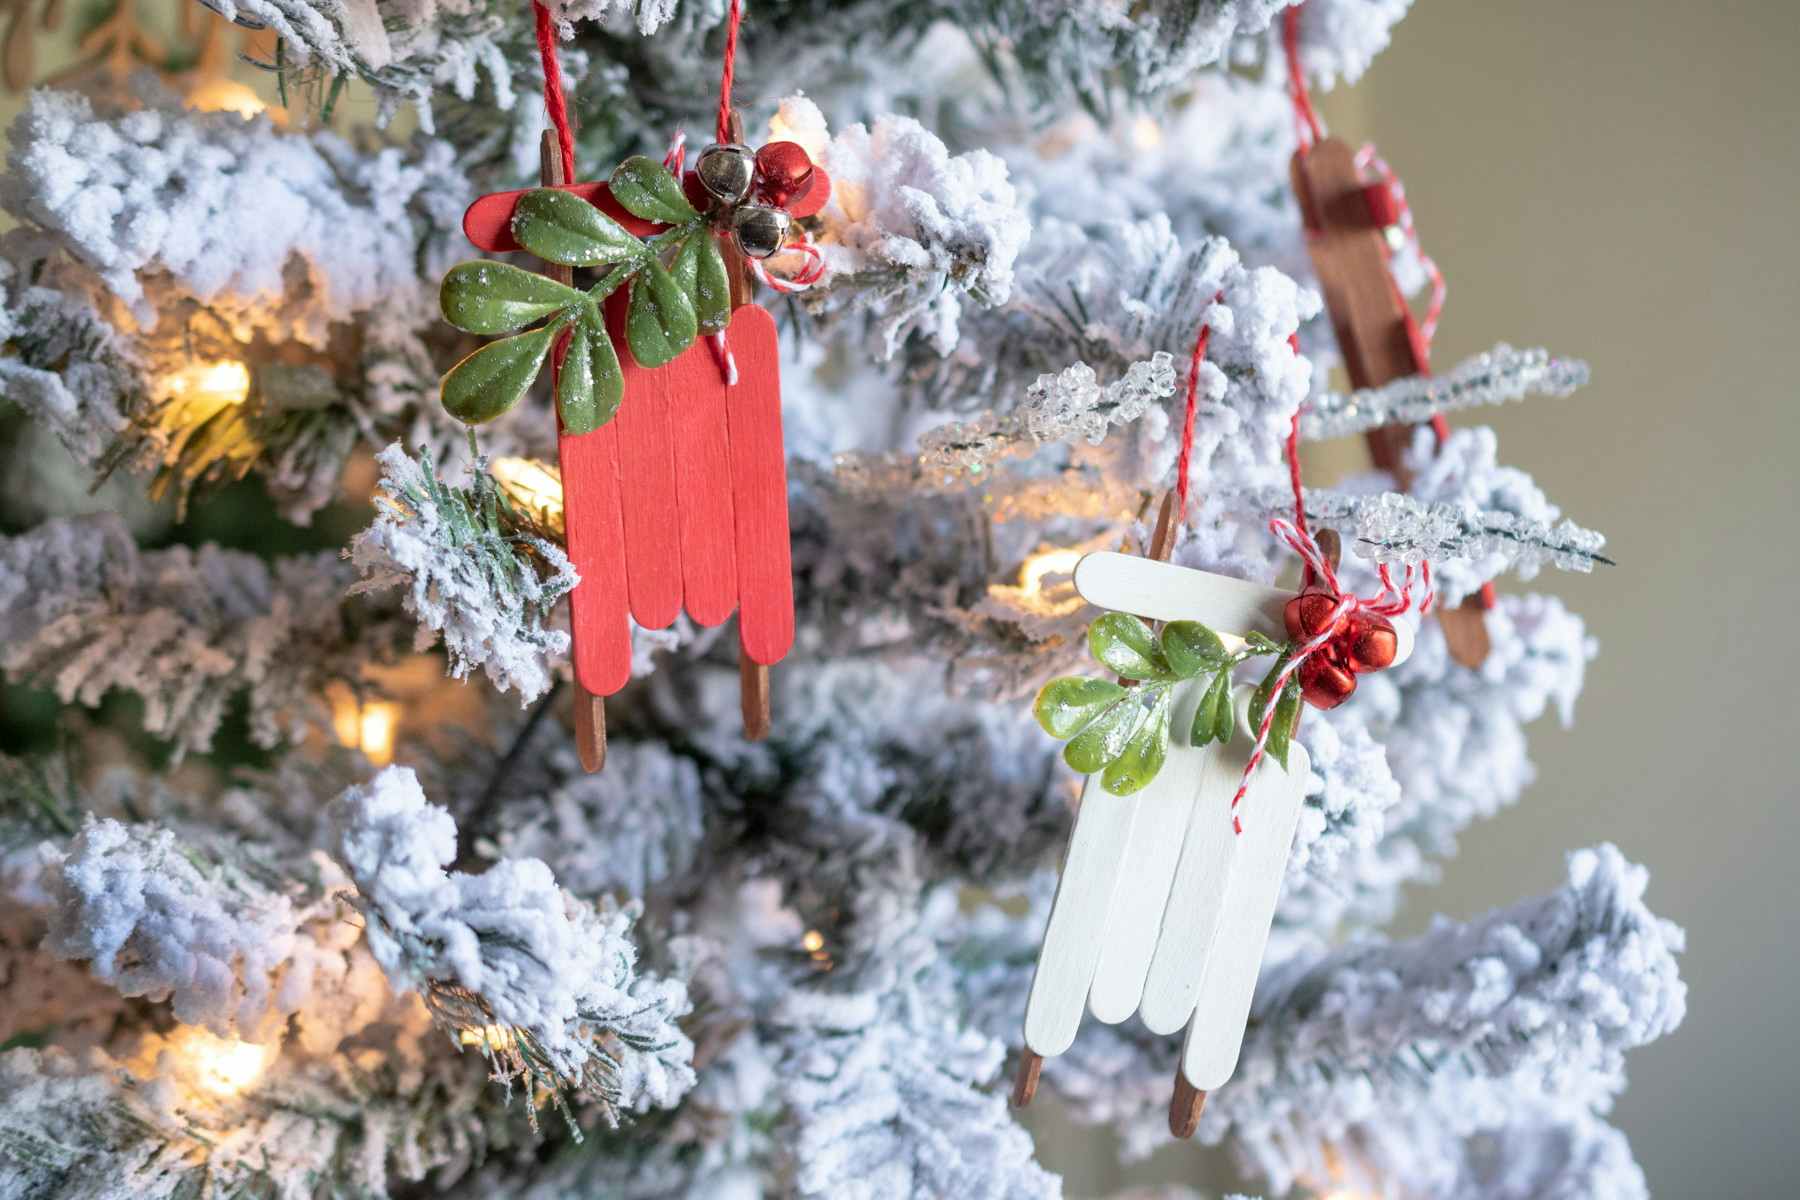 sled ornaments hanging on a tree